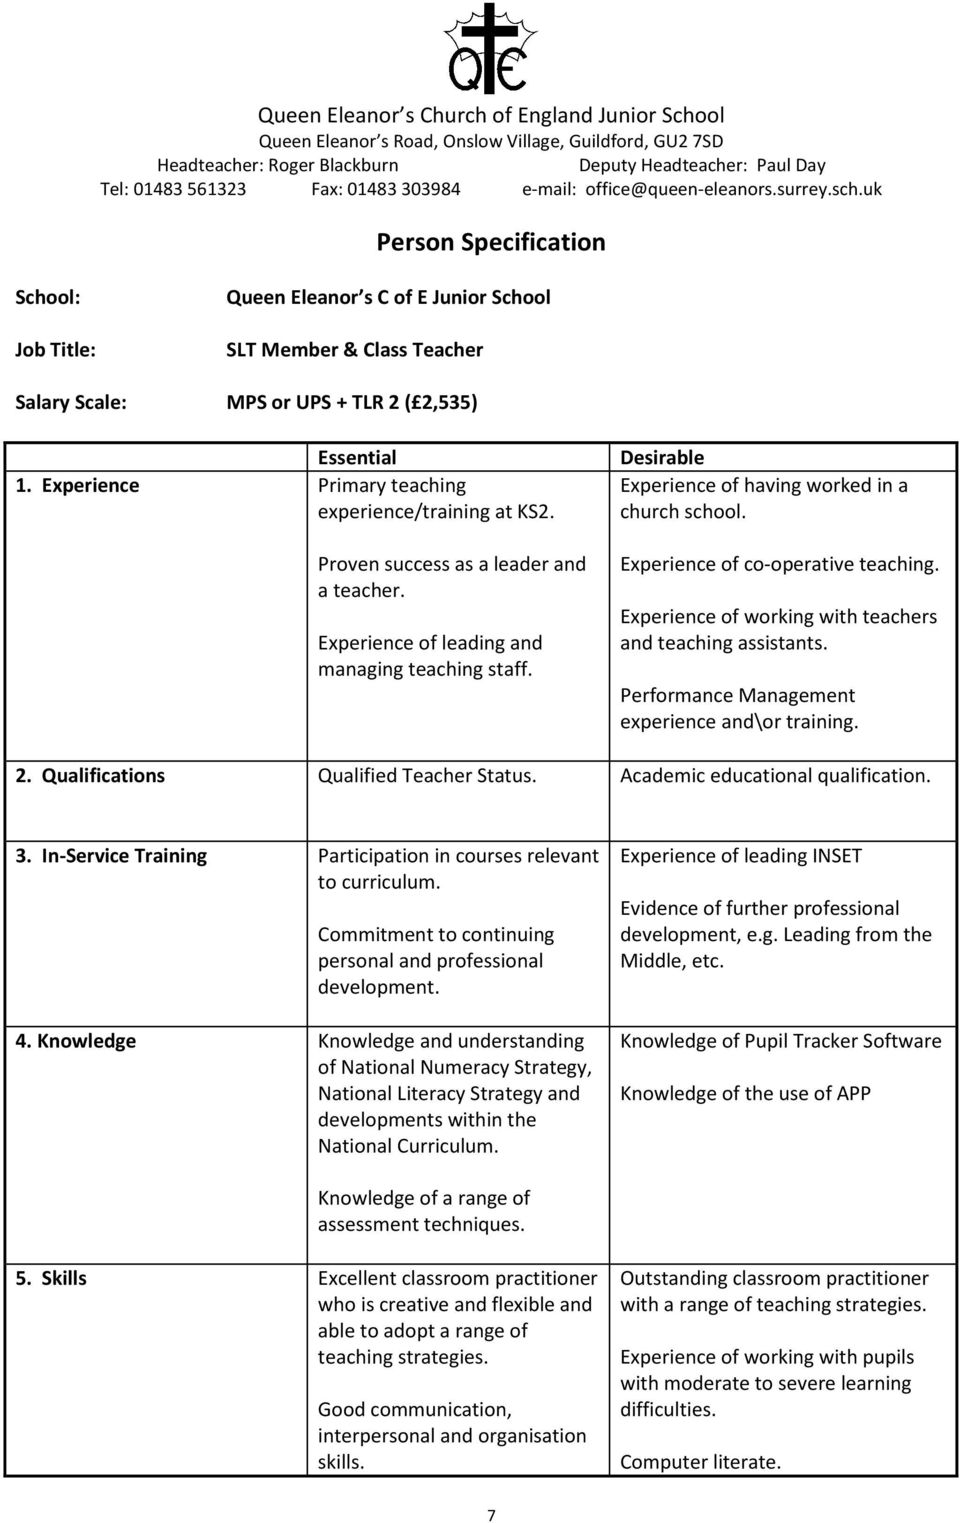 Desirable Experience of having worked in a church school. Experience of co-operative teaching. Experience of working with teachers and teaching assistants.